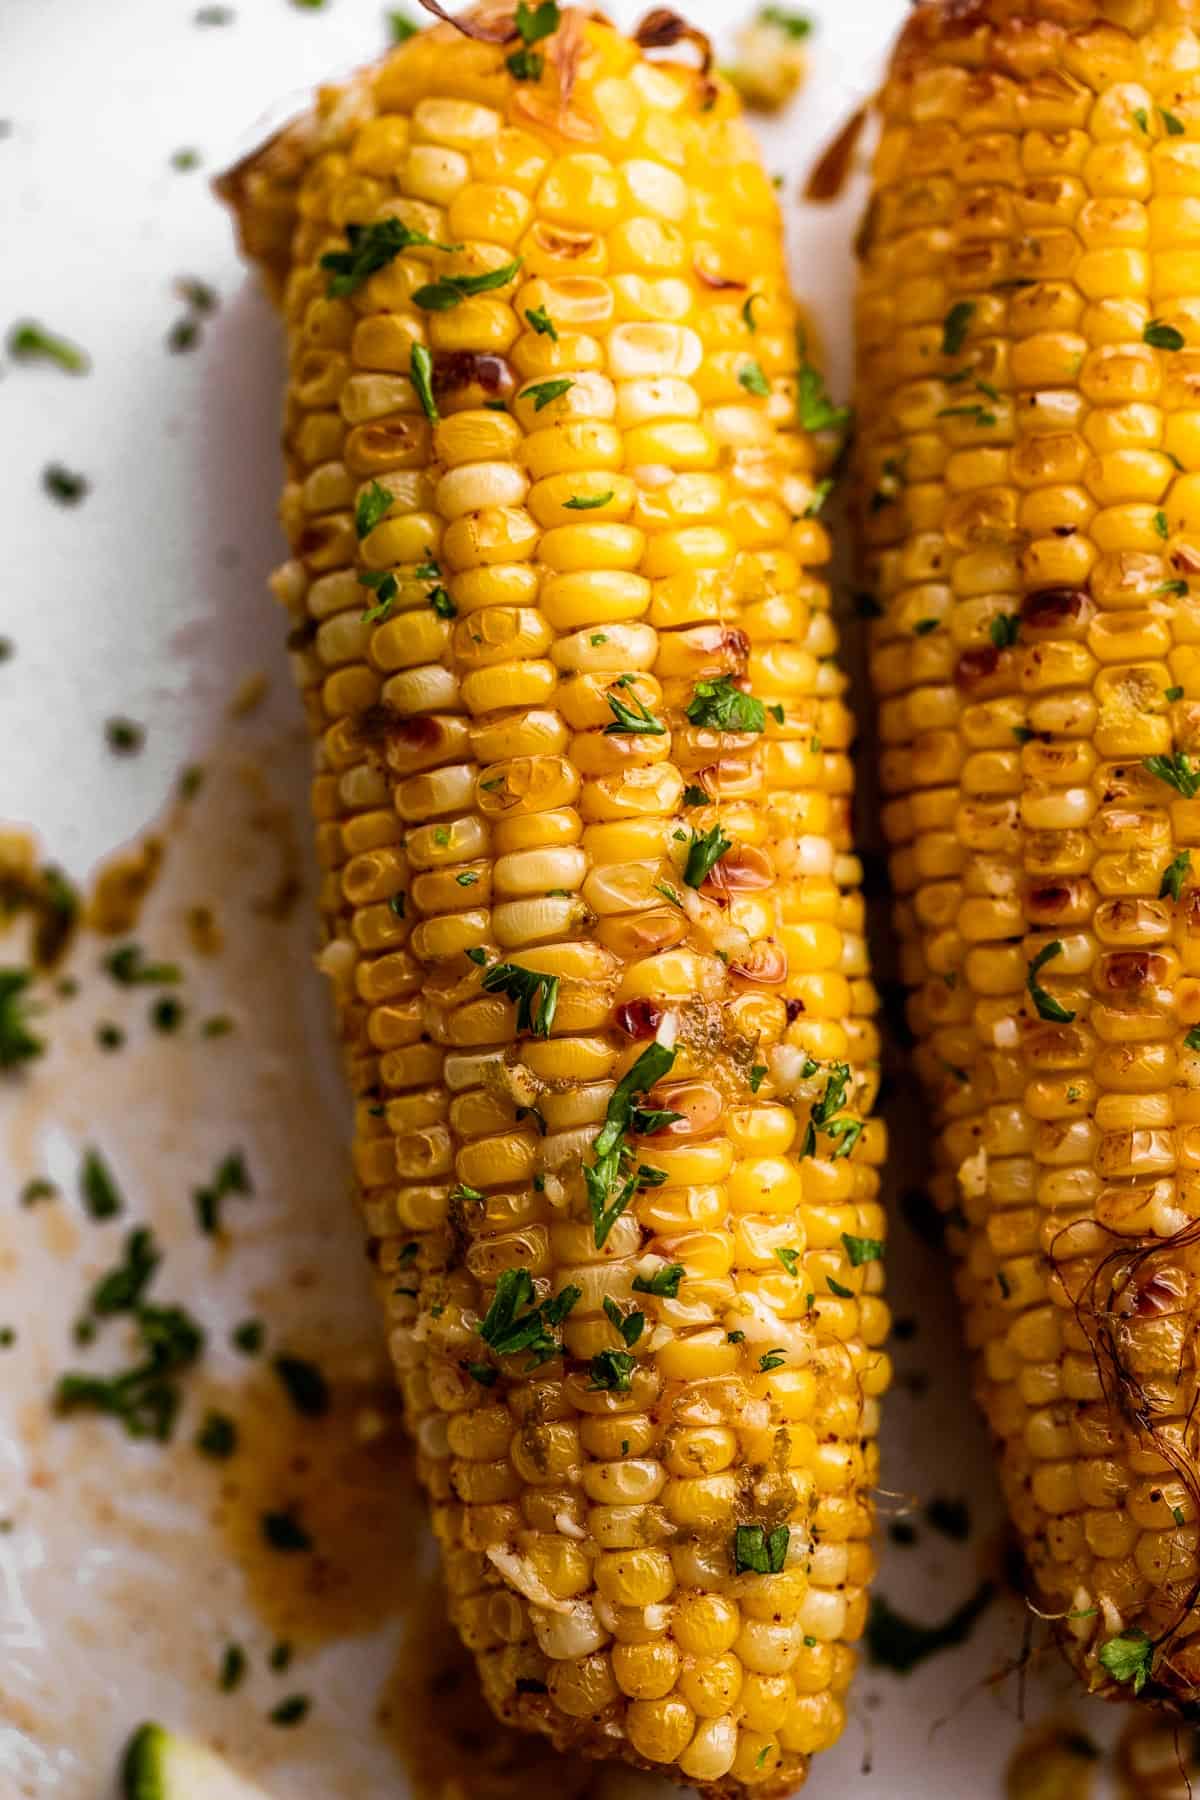 up close shot of corn on the cob sprinkled with chopped green herbs.